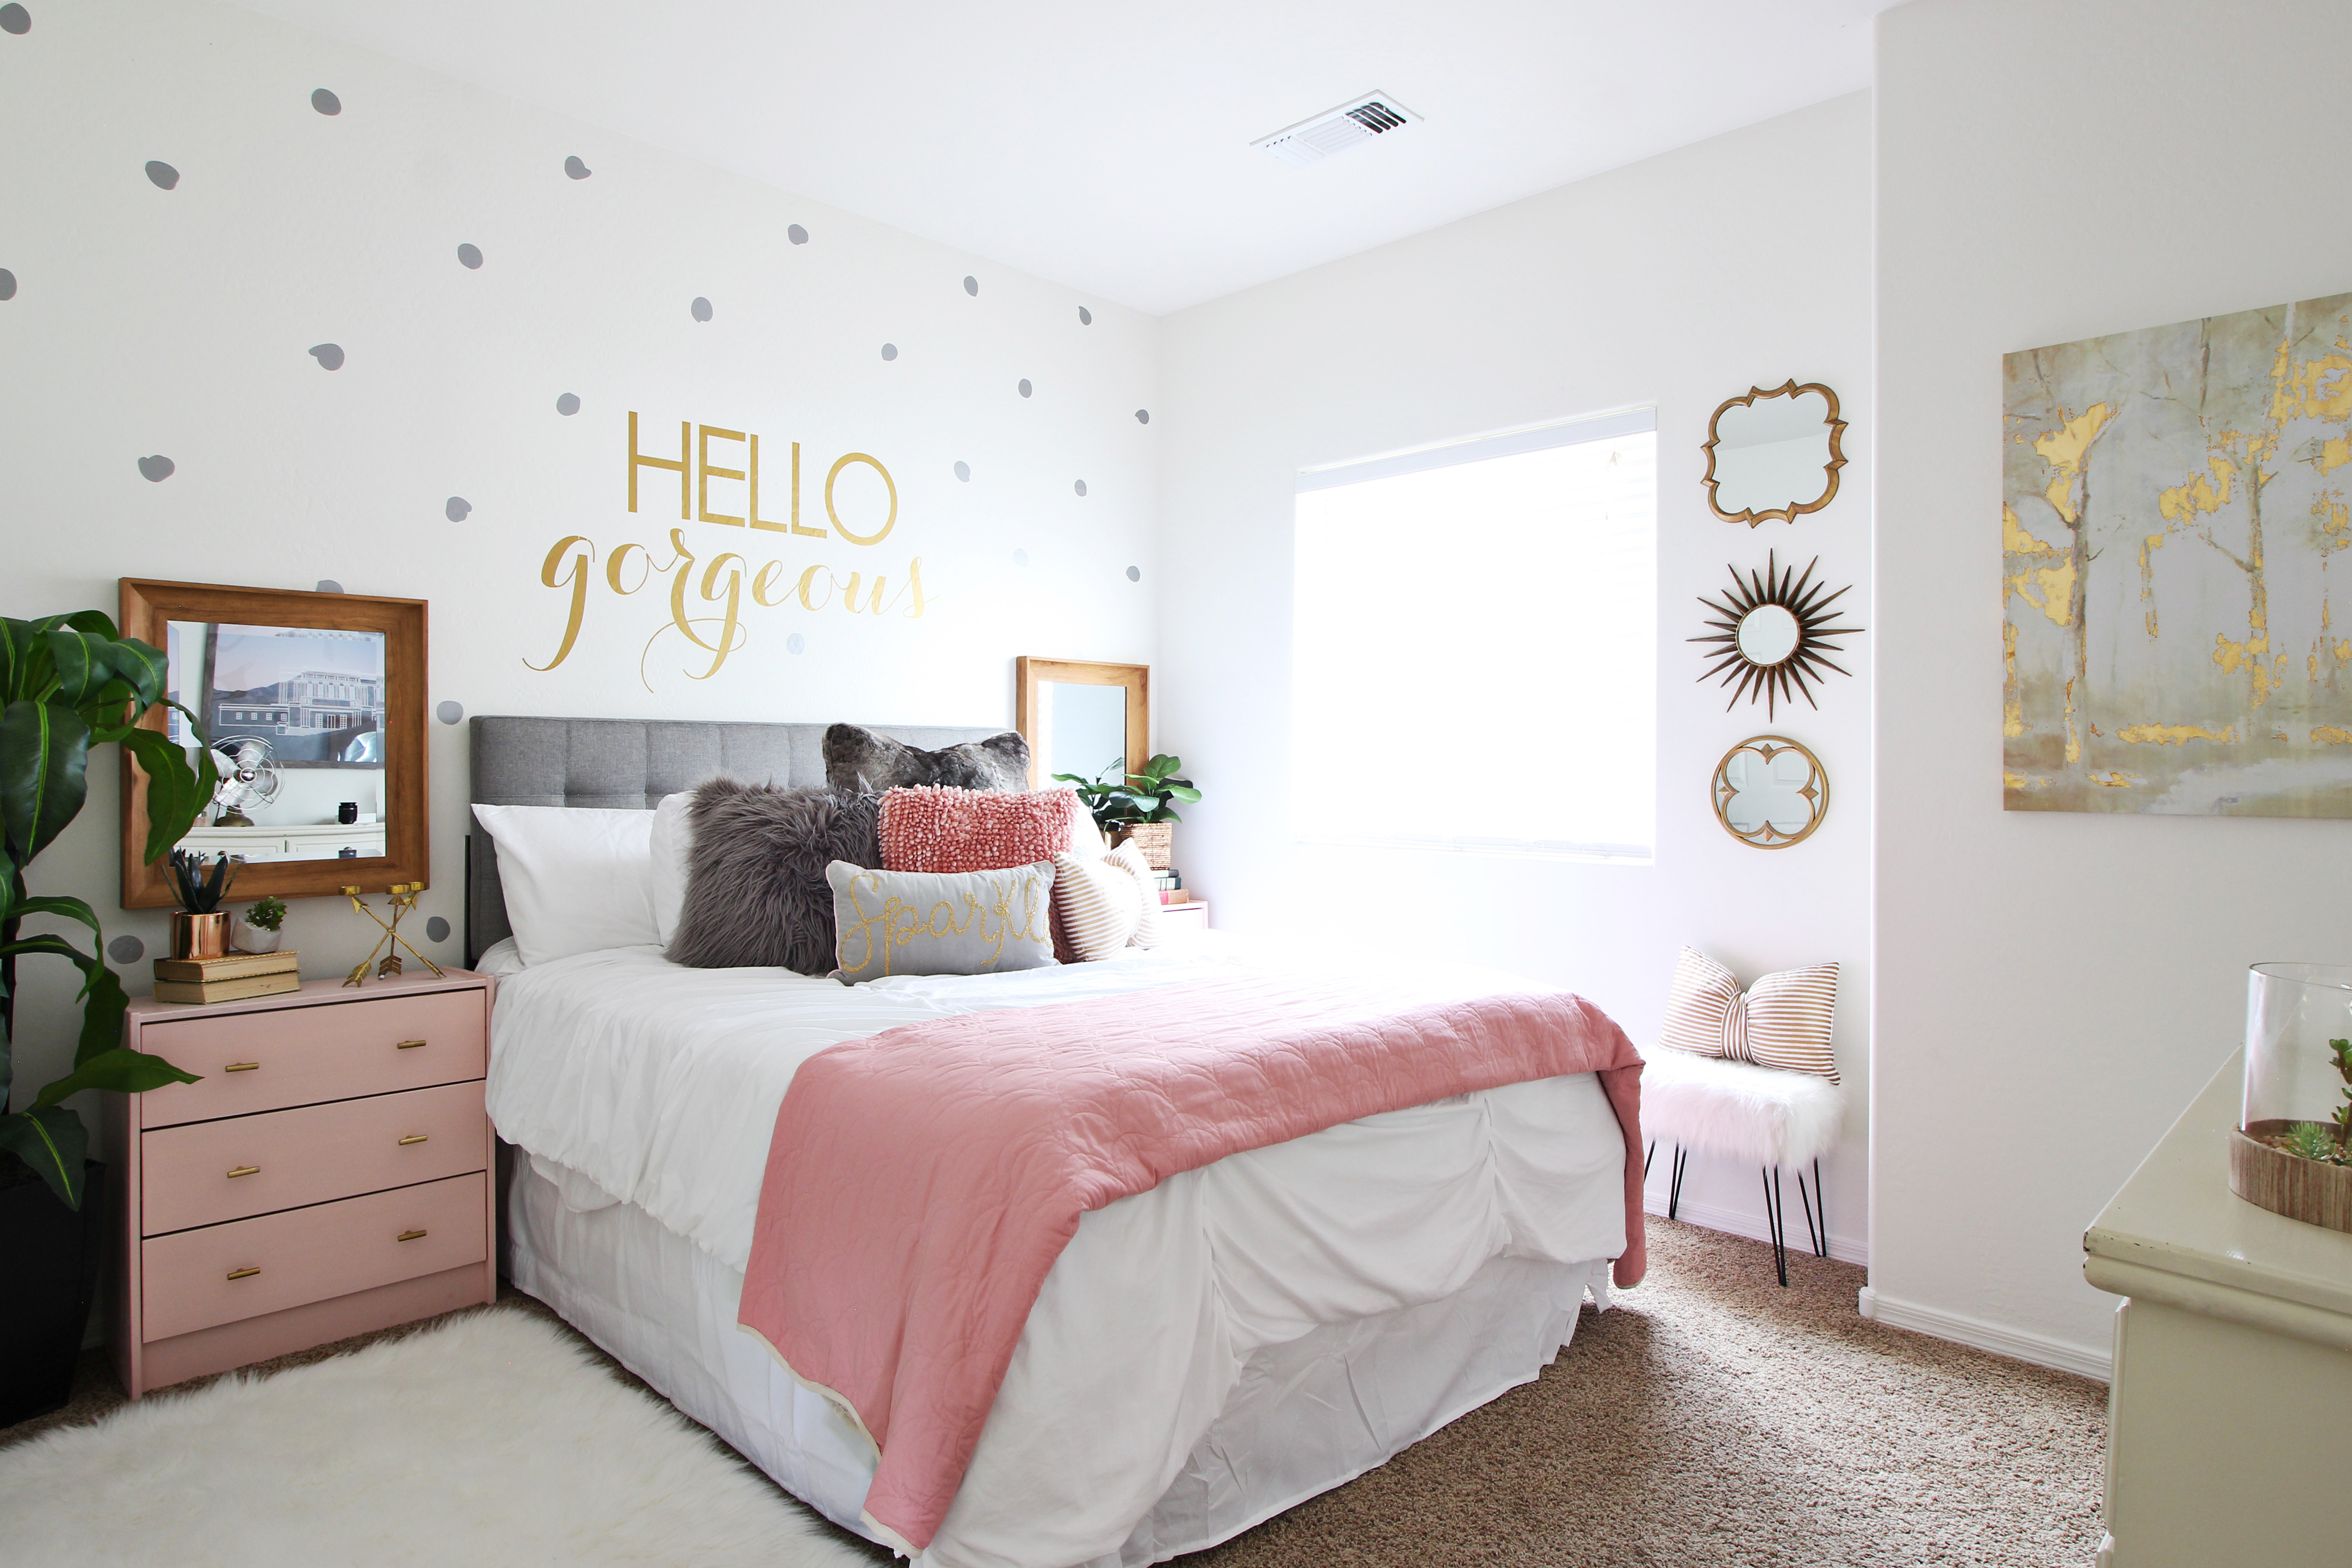 Diy Bedroom Makeovers - A Polished And Renter Friendly Bedroom Makeover : This confetti style duvet cover is an easy project to make for your bedroom.